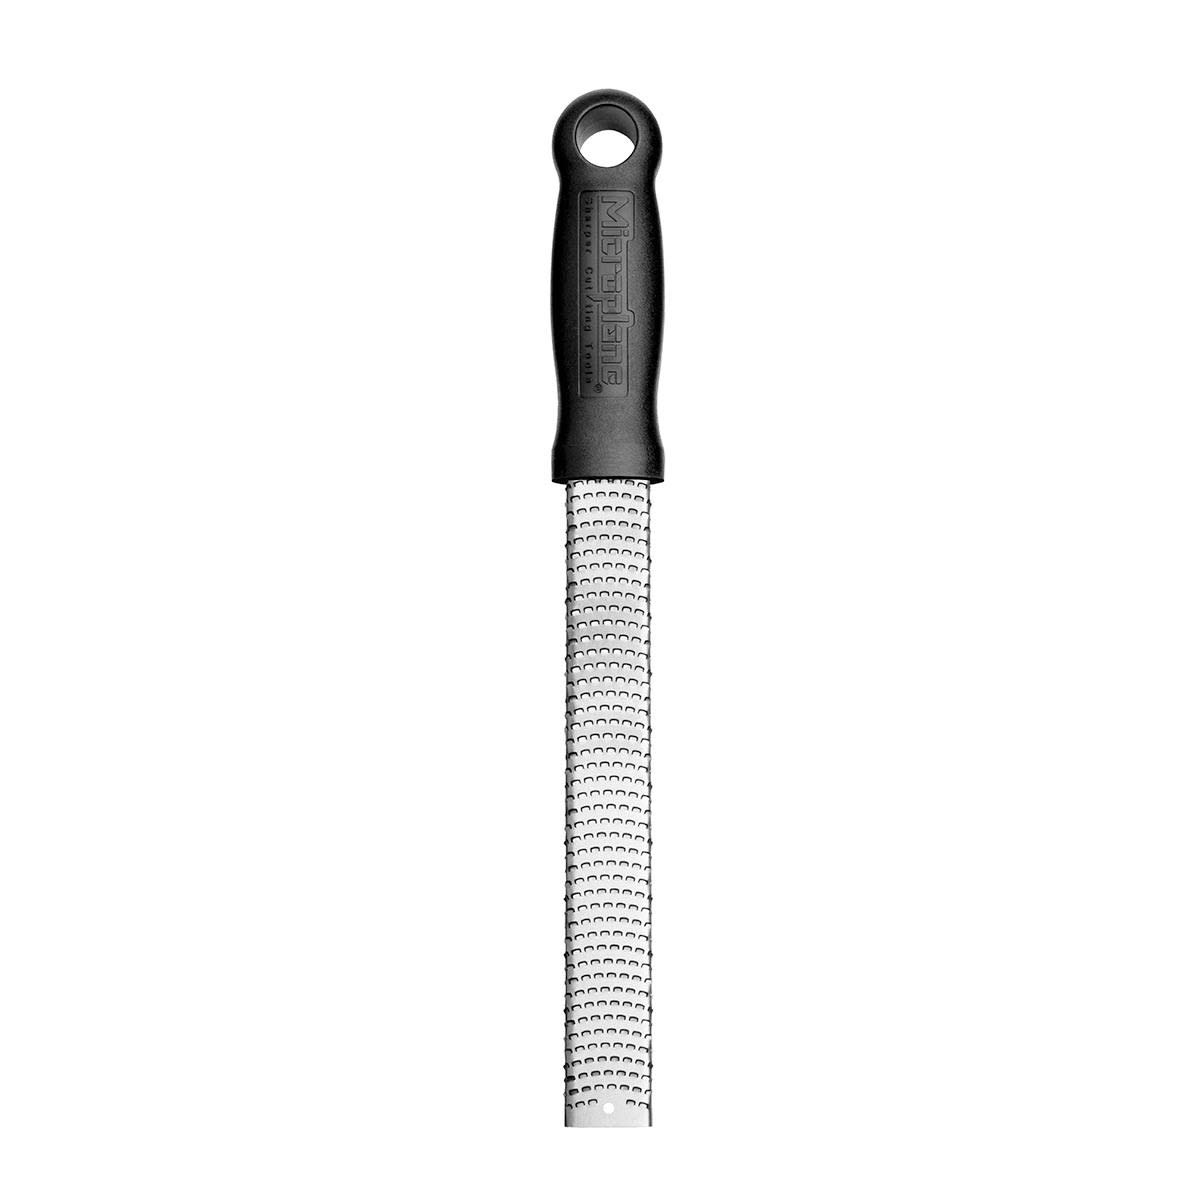 Zester Grater CSPH - Black - Heart of the Home